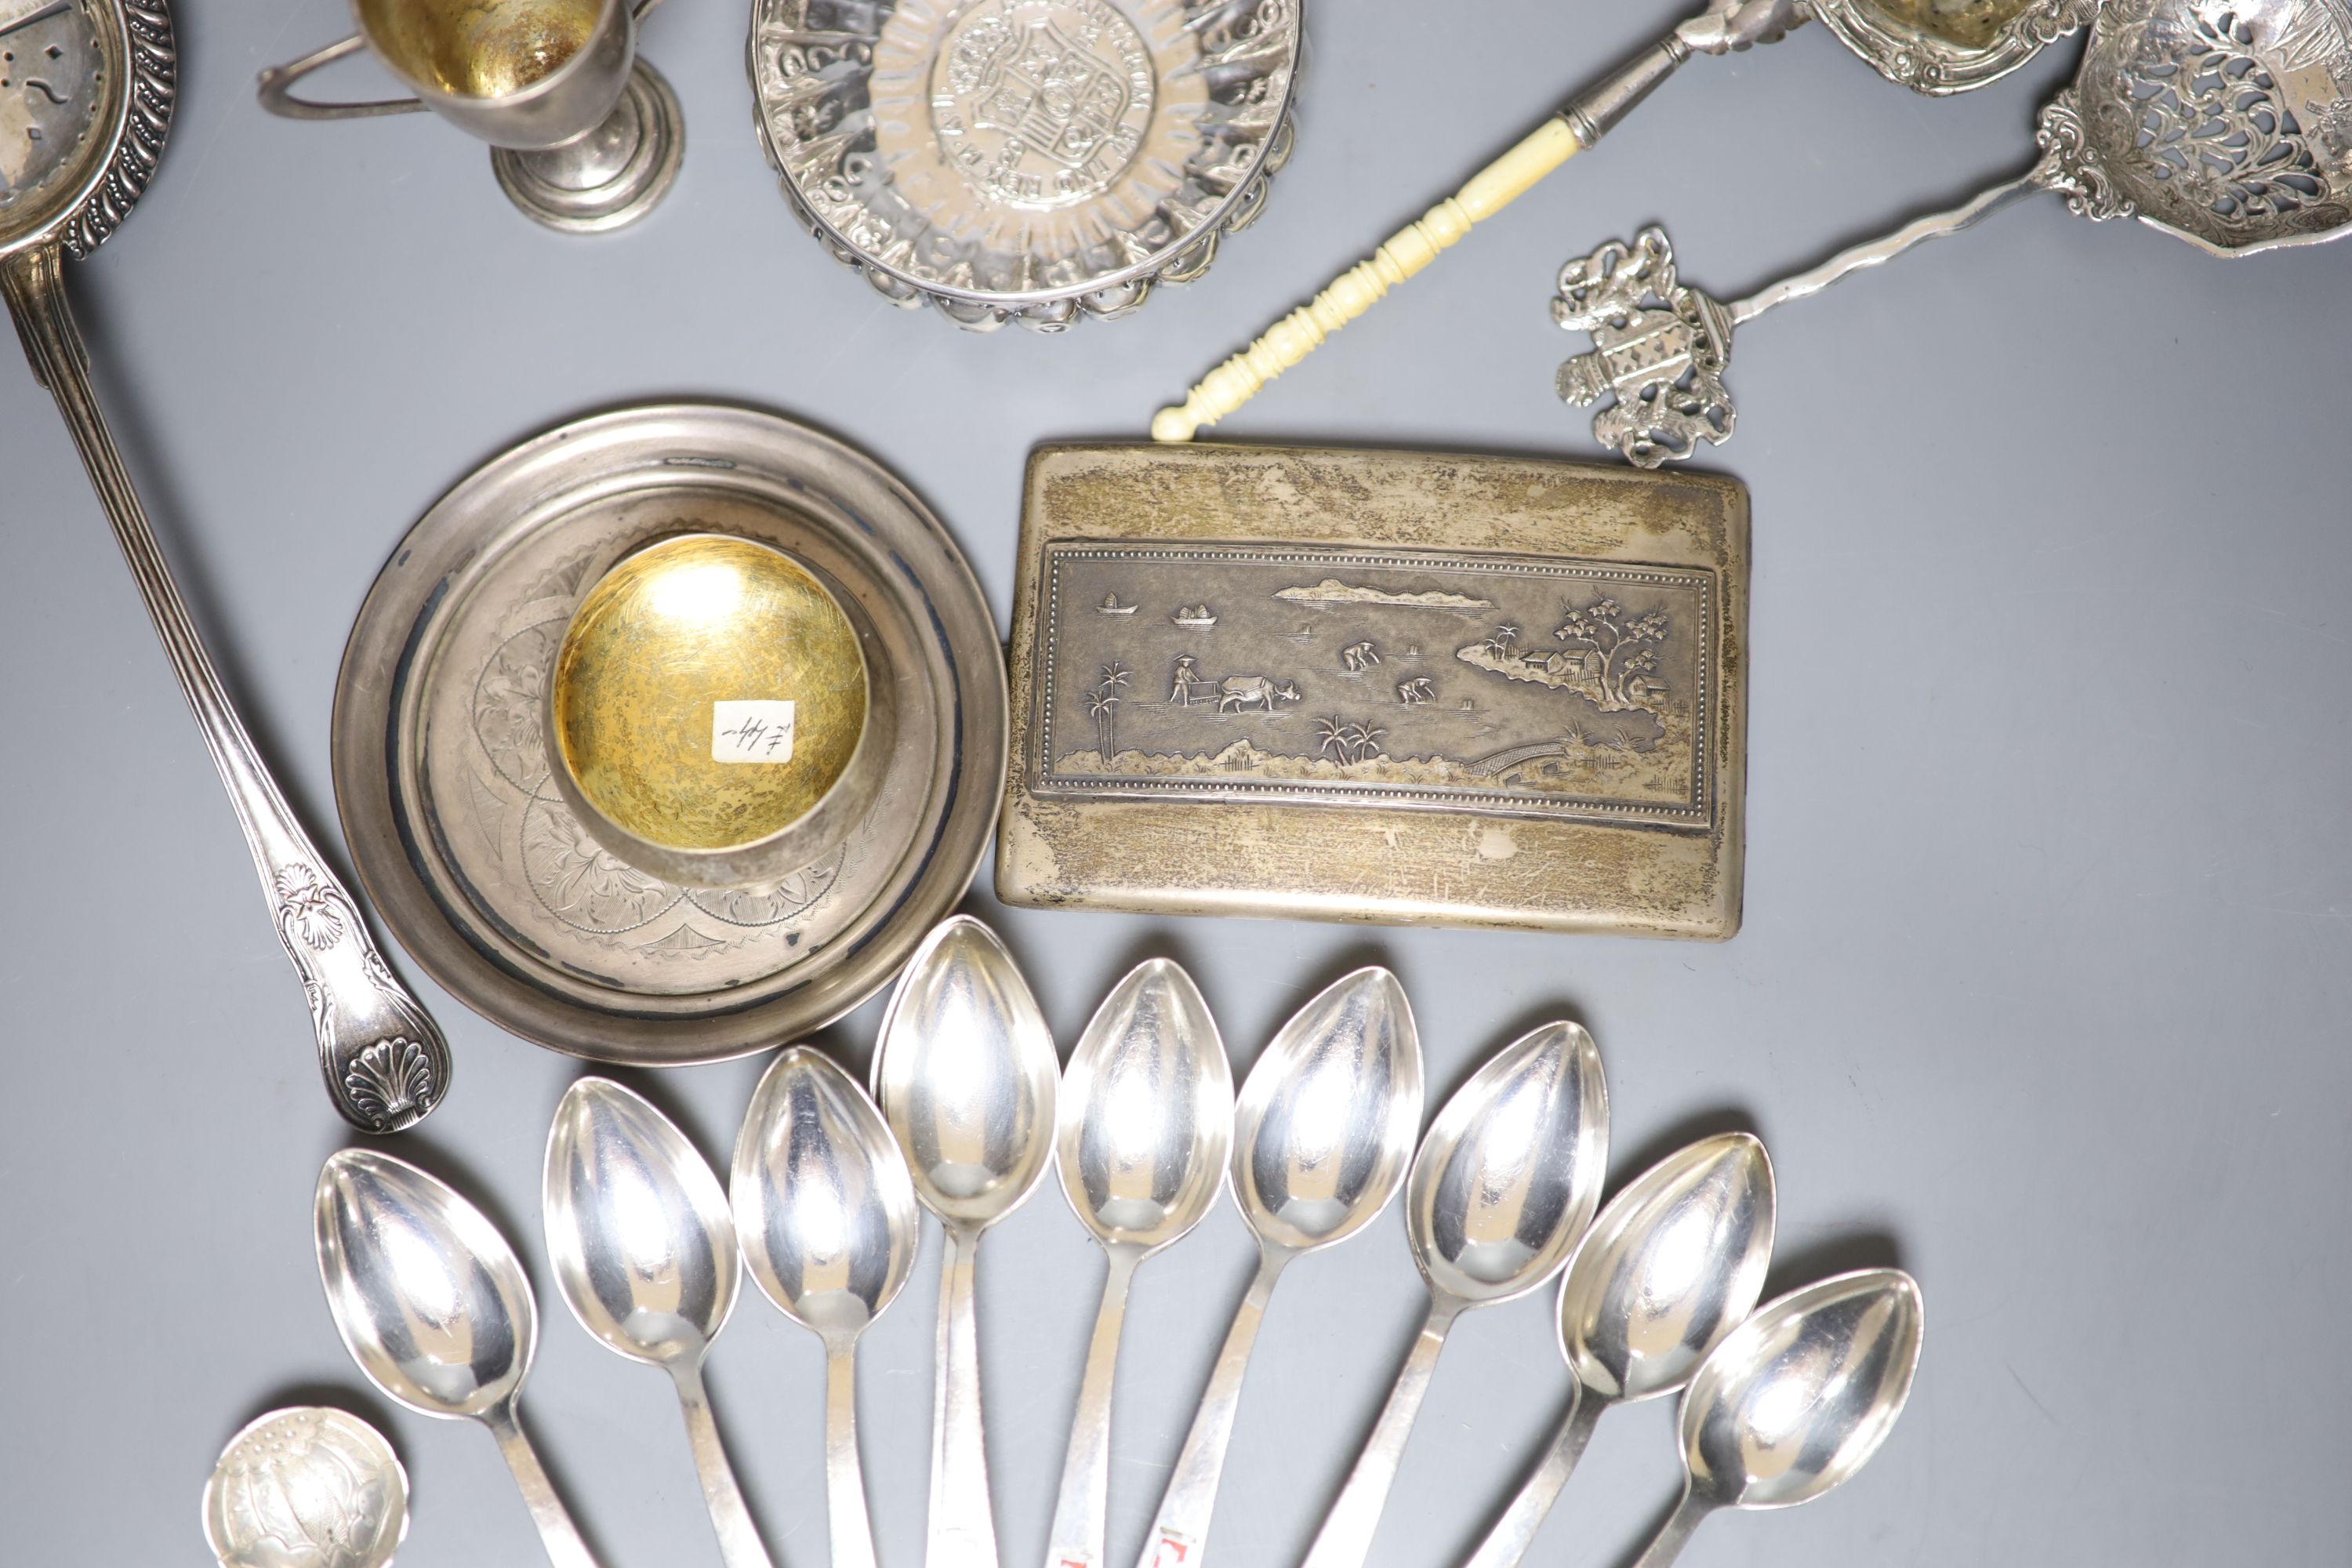 A George V silver sifter spoon and a quantity of assorted white metal items, including a Tiffany & Co sterling salt, a Swedish sifter ladle, sterling & enamel coffee spoons, etc.